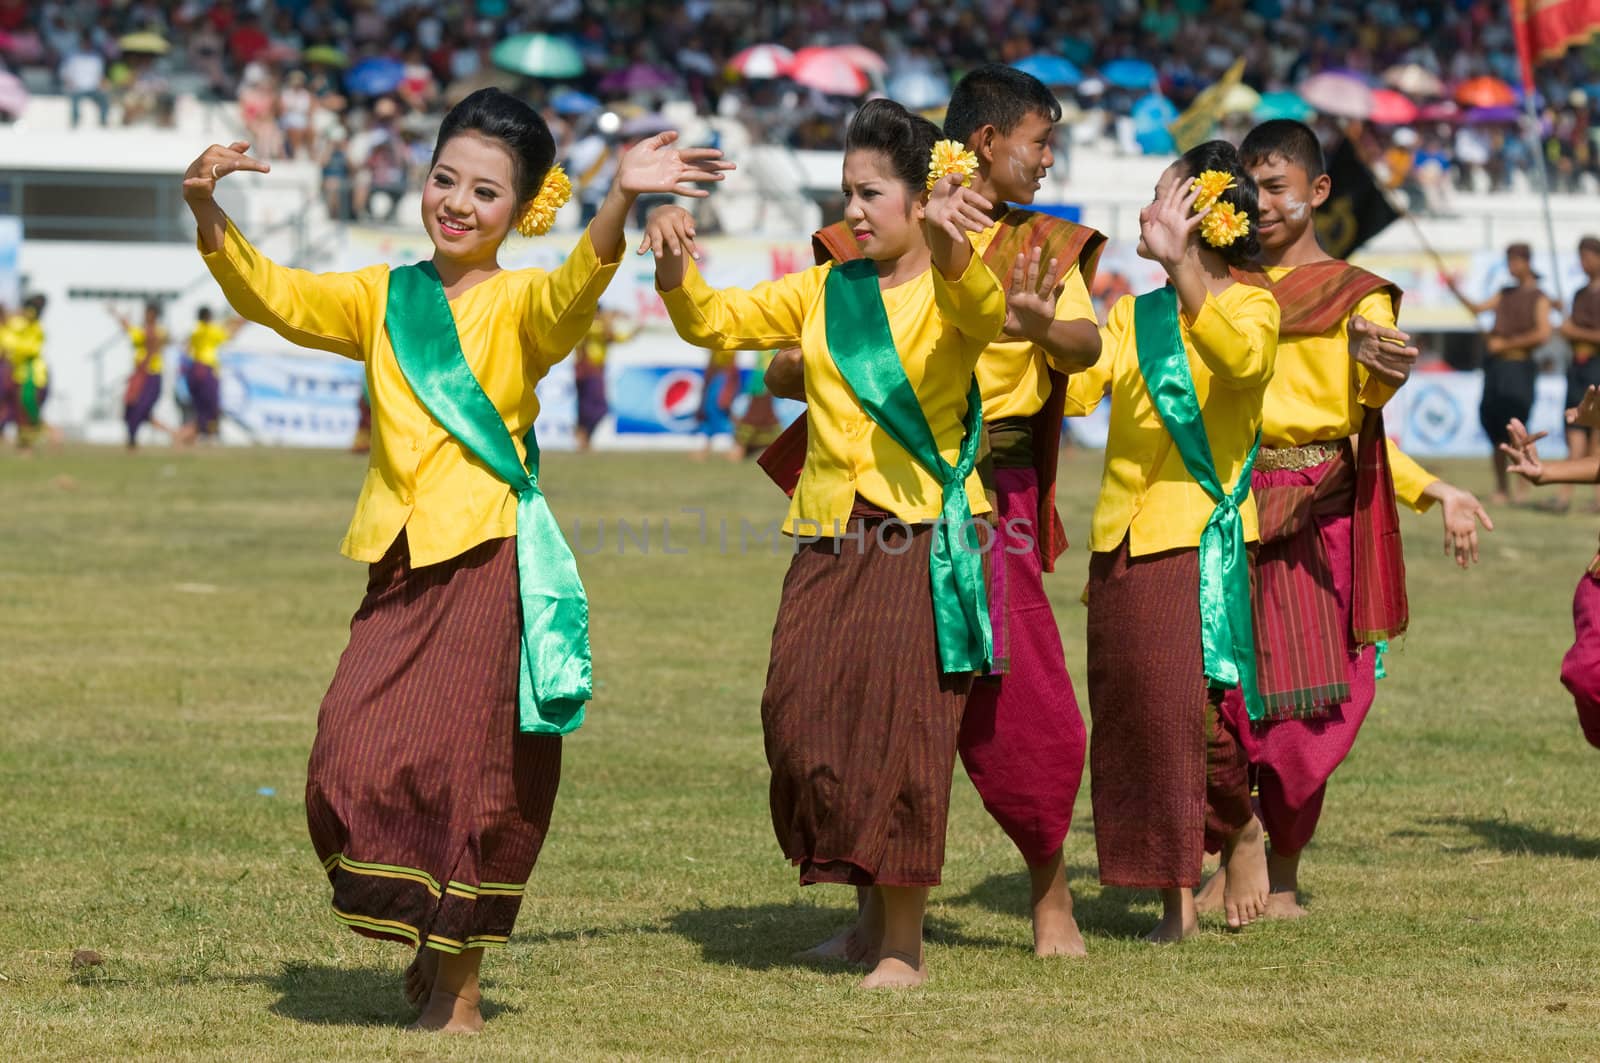 SURIN - NOVEMBER 21: Dancers in traditional farmer's outfits during The Annual Elephant Roundup on November 21, 2010 in Surin, Thailand.